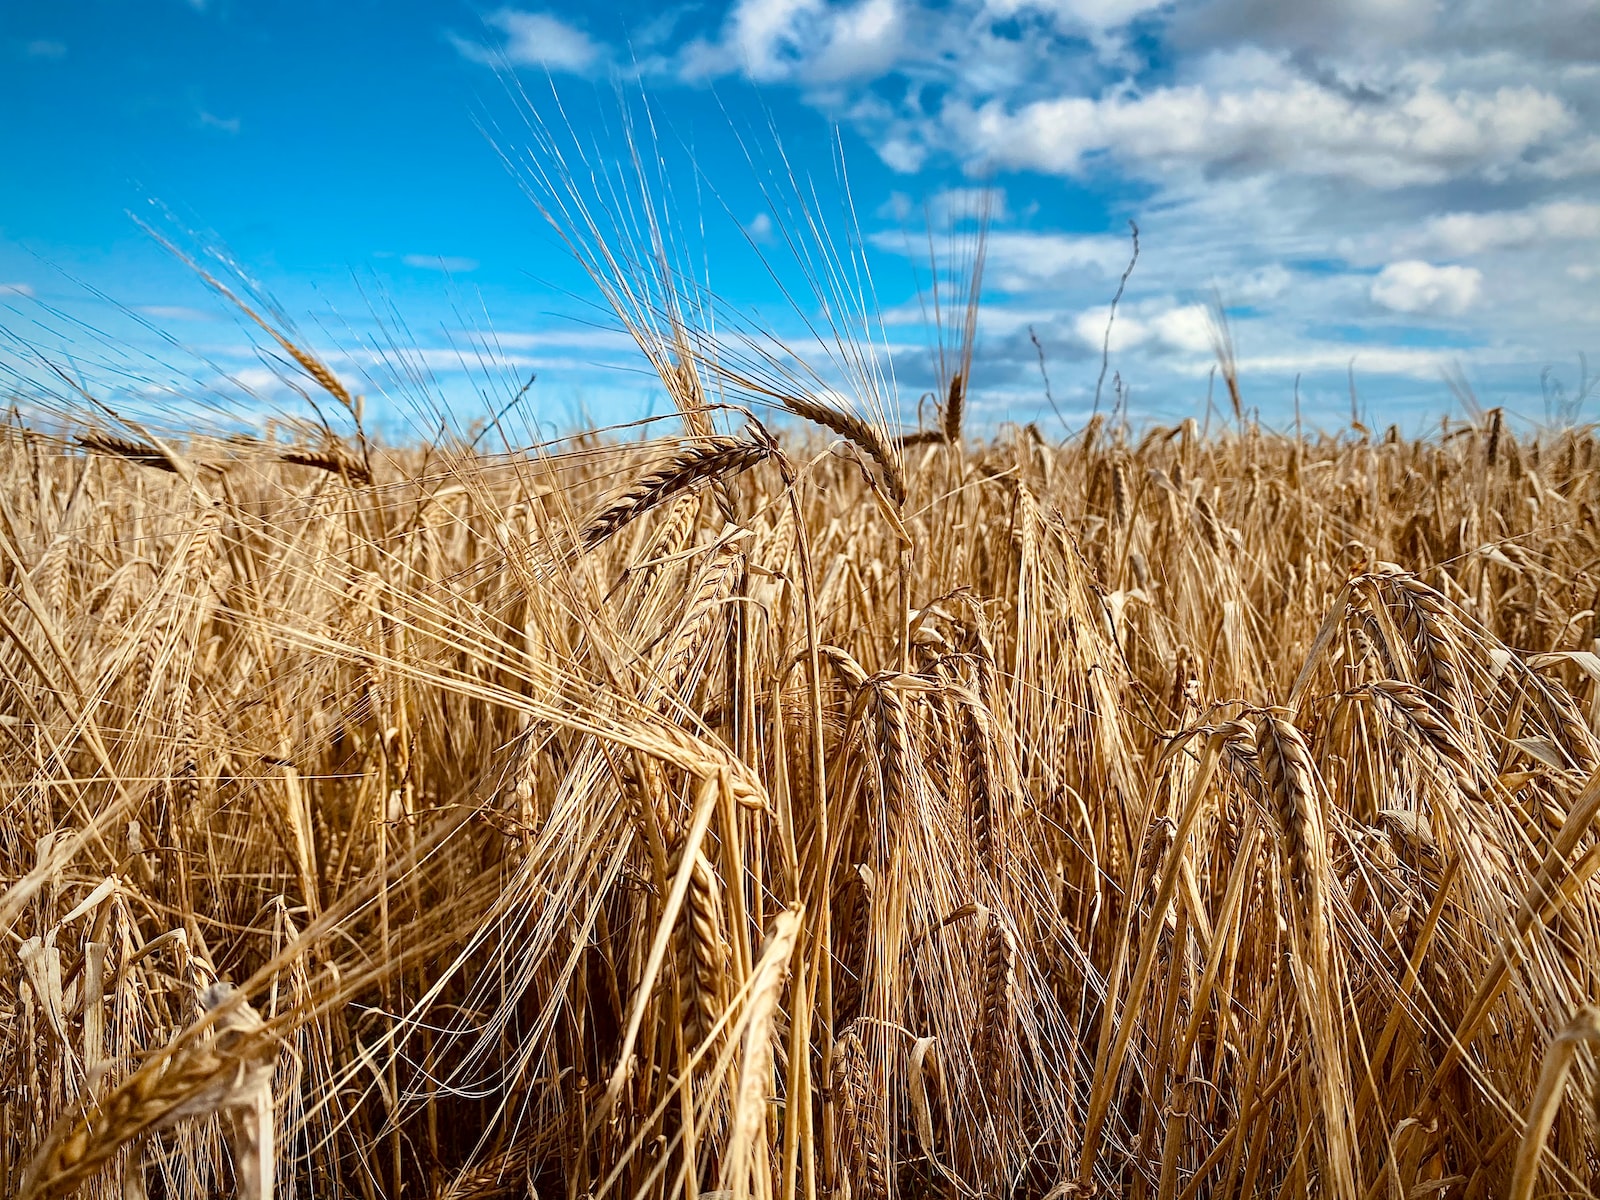 Wheat Gene Discovery Seen as “Holy Grail” by Scientists